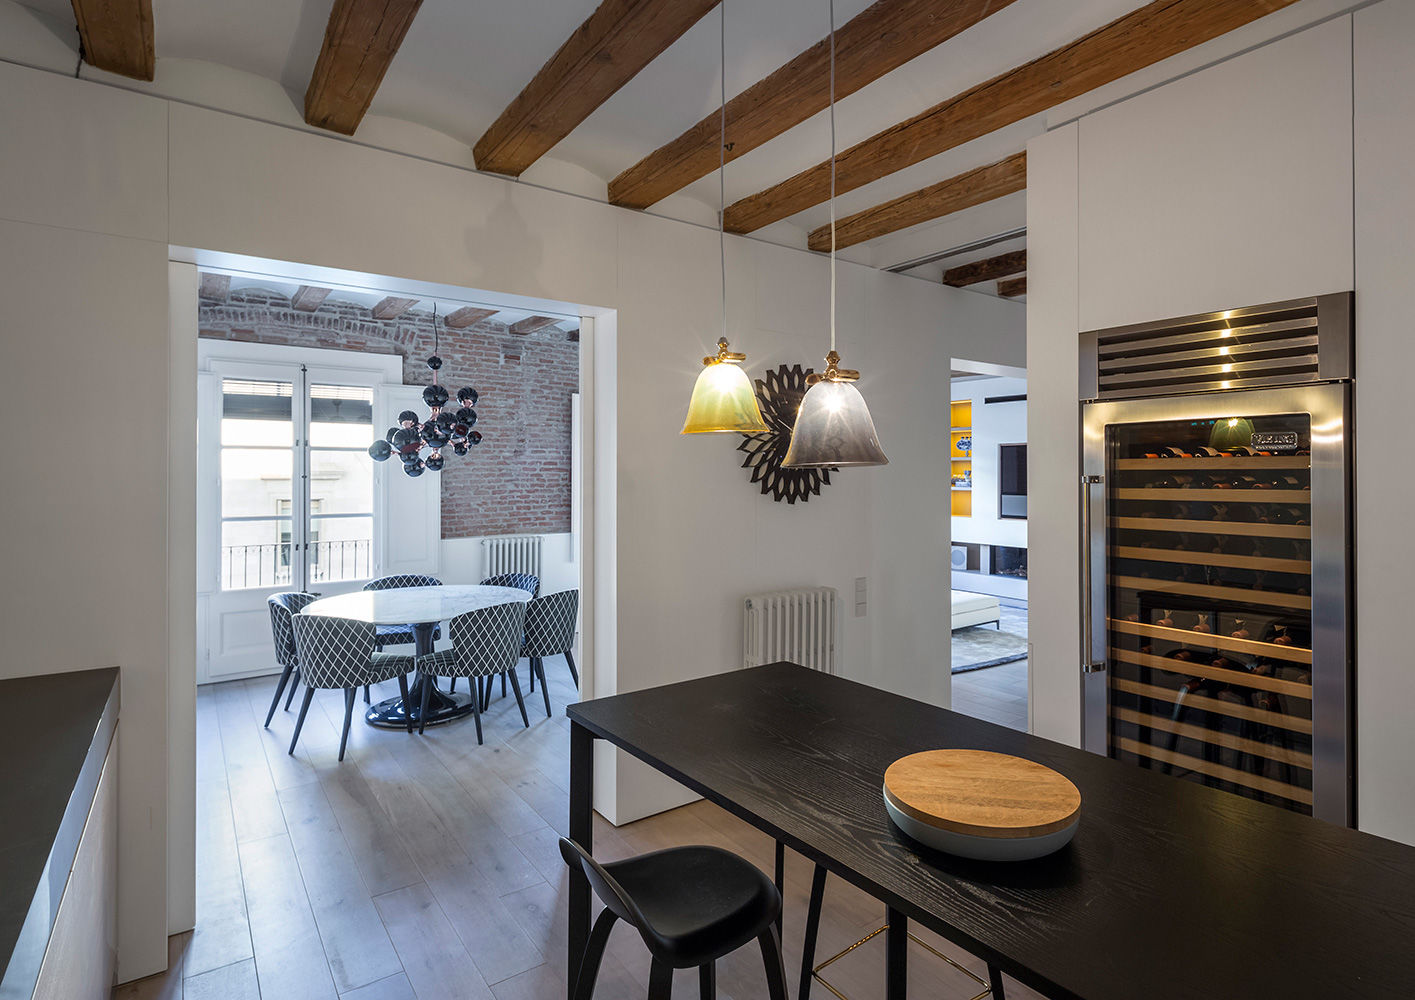 Modern Dining Room Features Brick Walls & Exposed Beams in Barcelona (1)